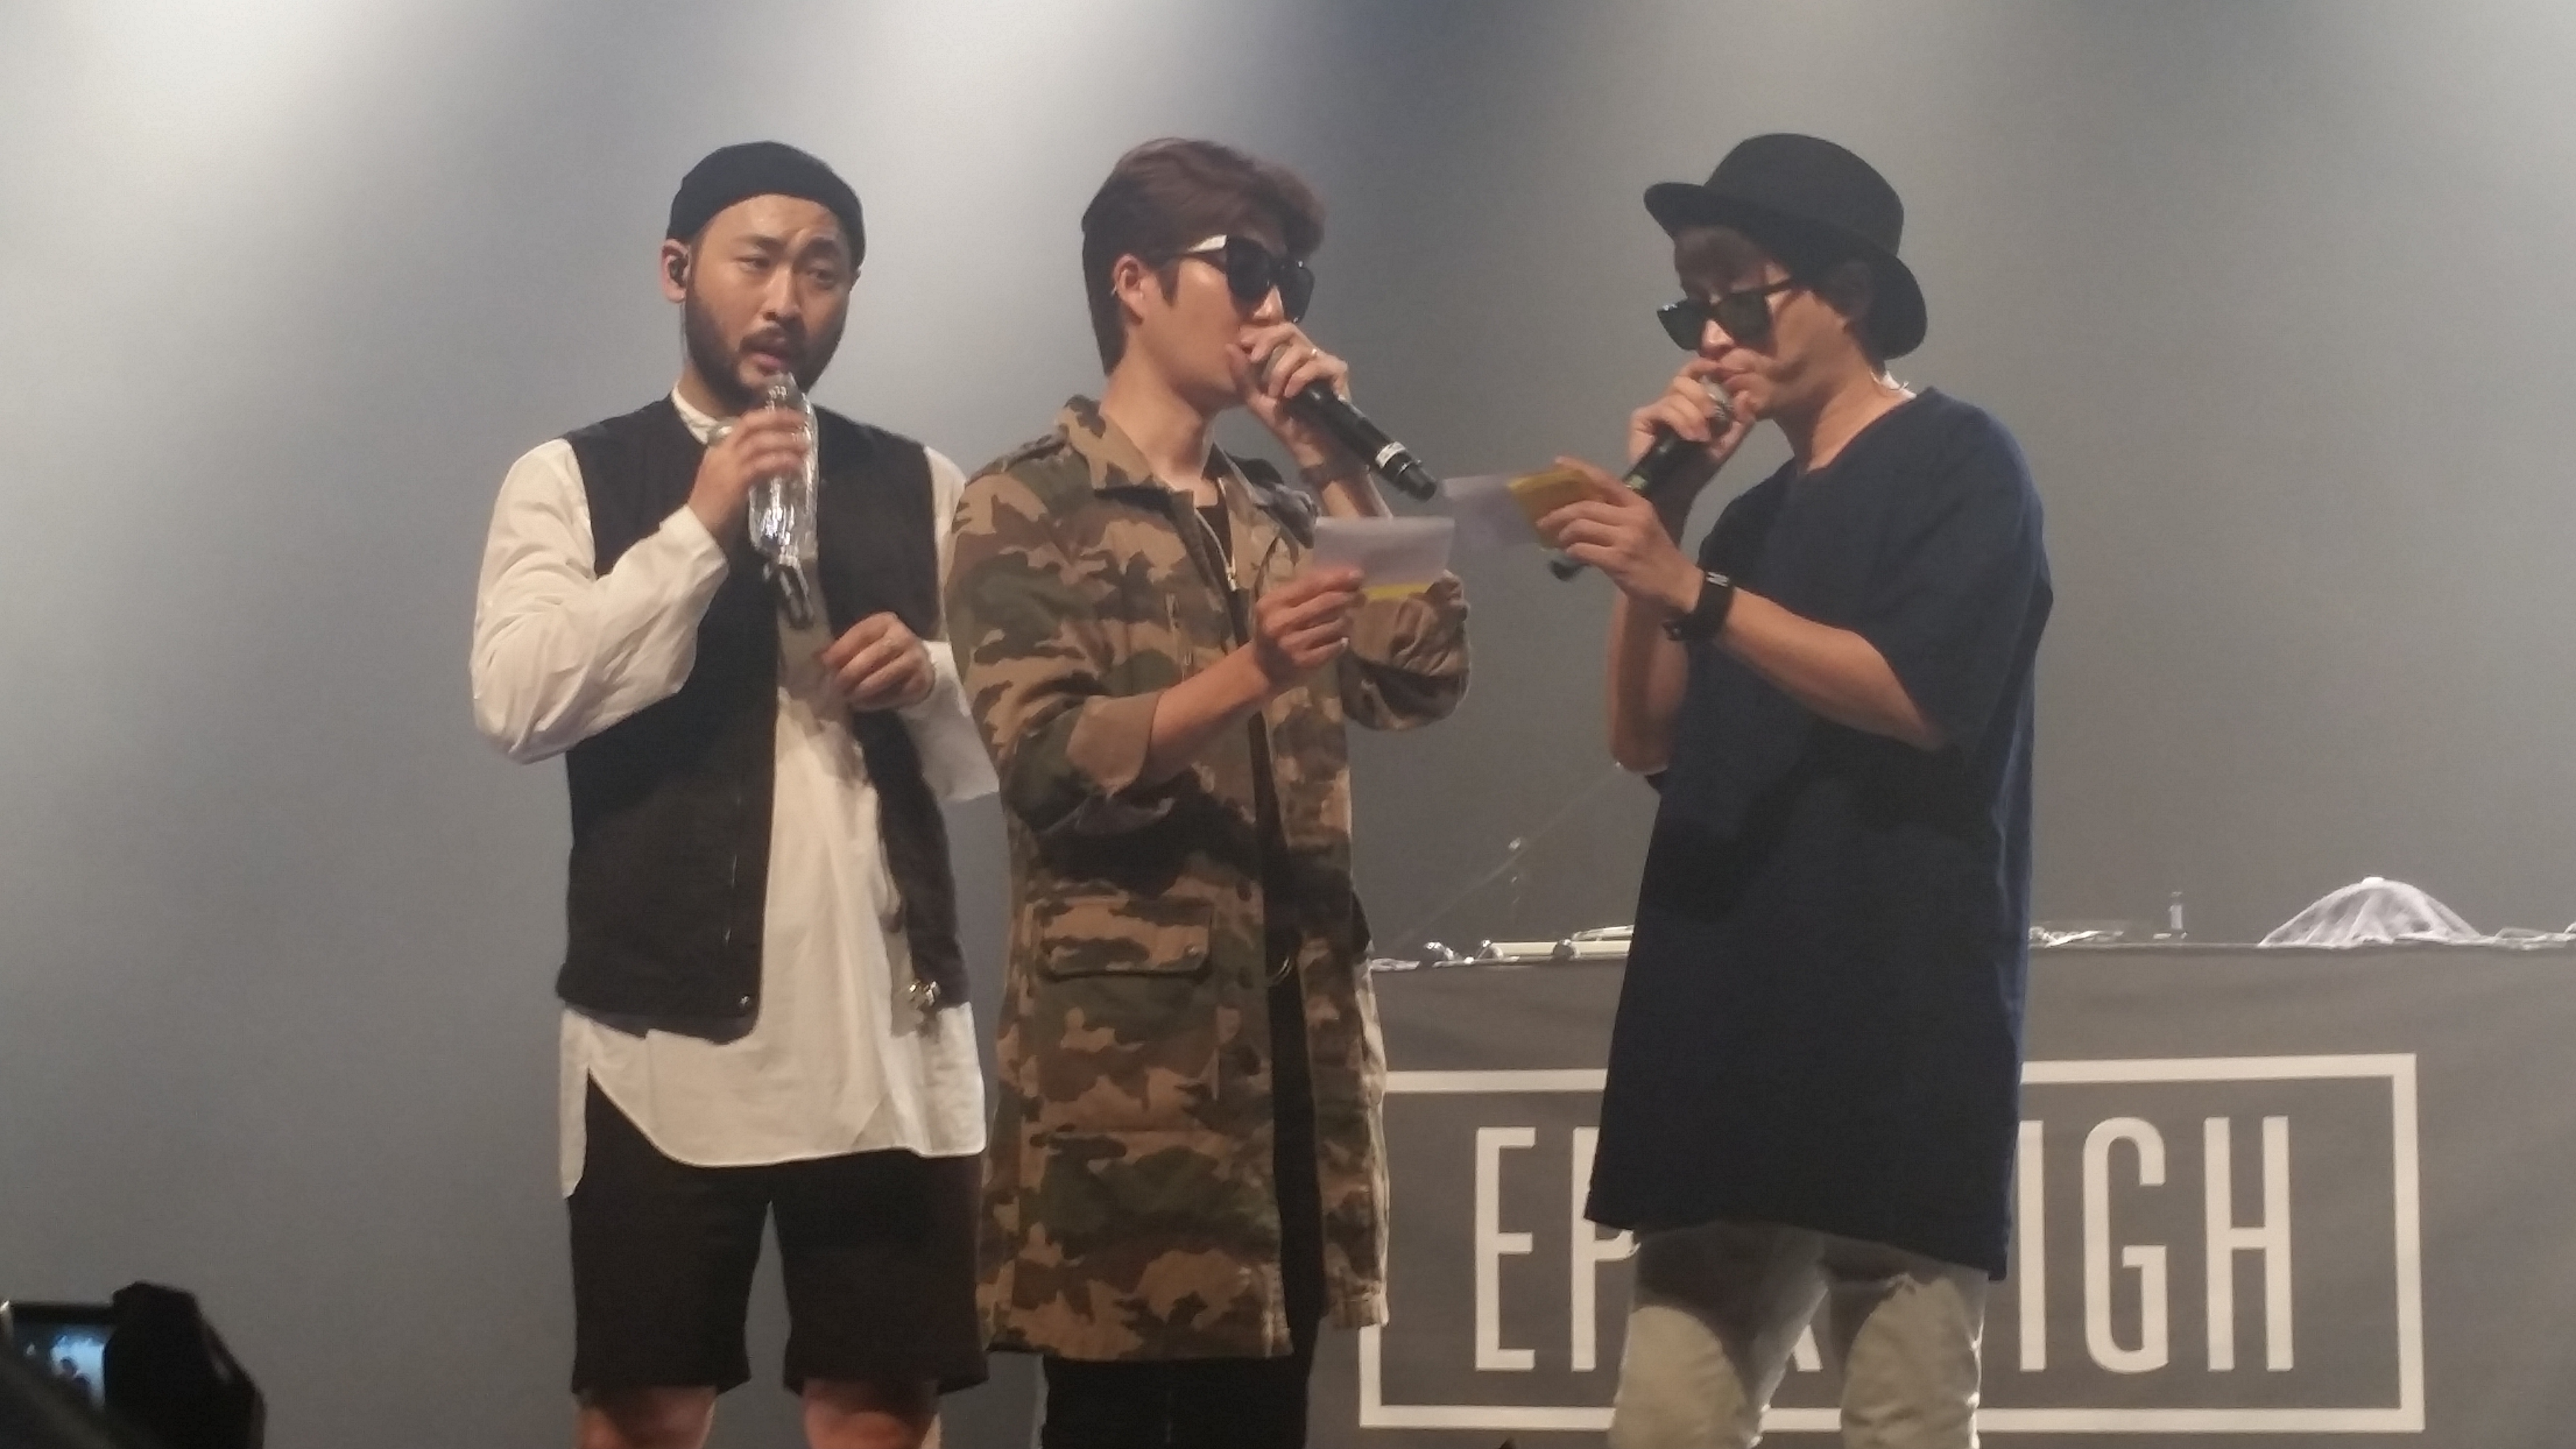 You are currently viewing In Pictures: Epik High 2015 North American Tour